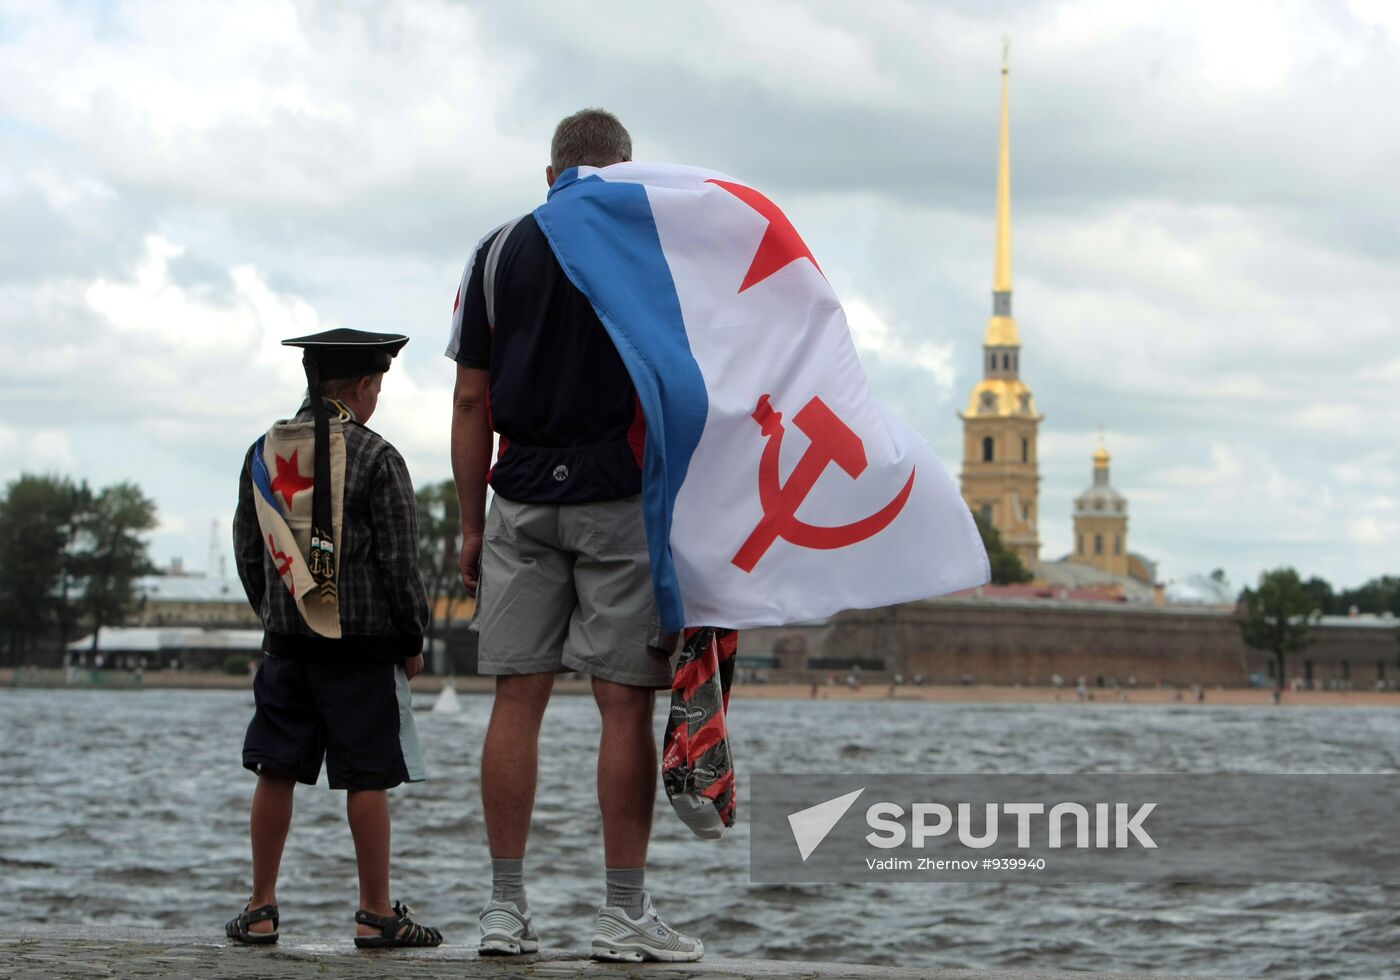 St. Petersburg celebrates Russia's Navy Day